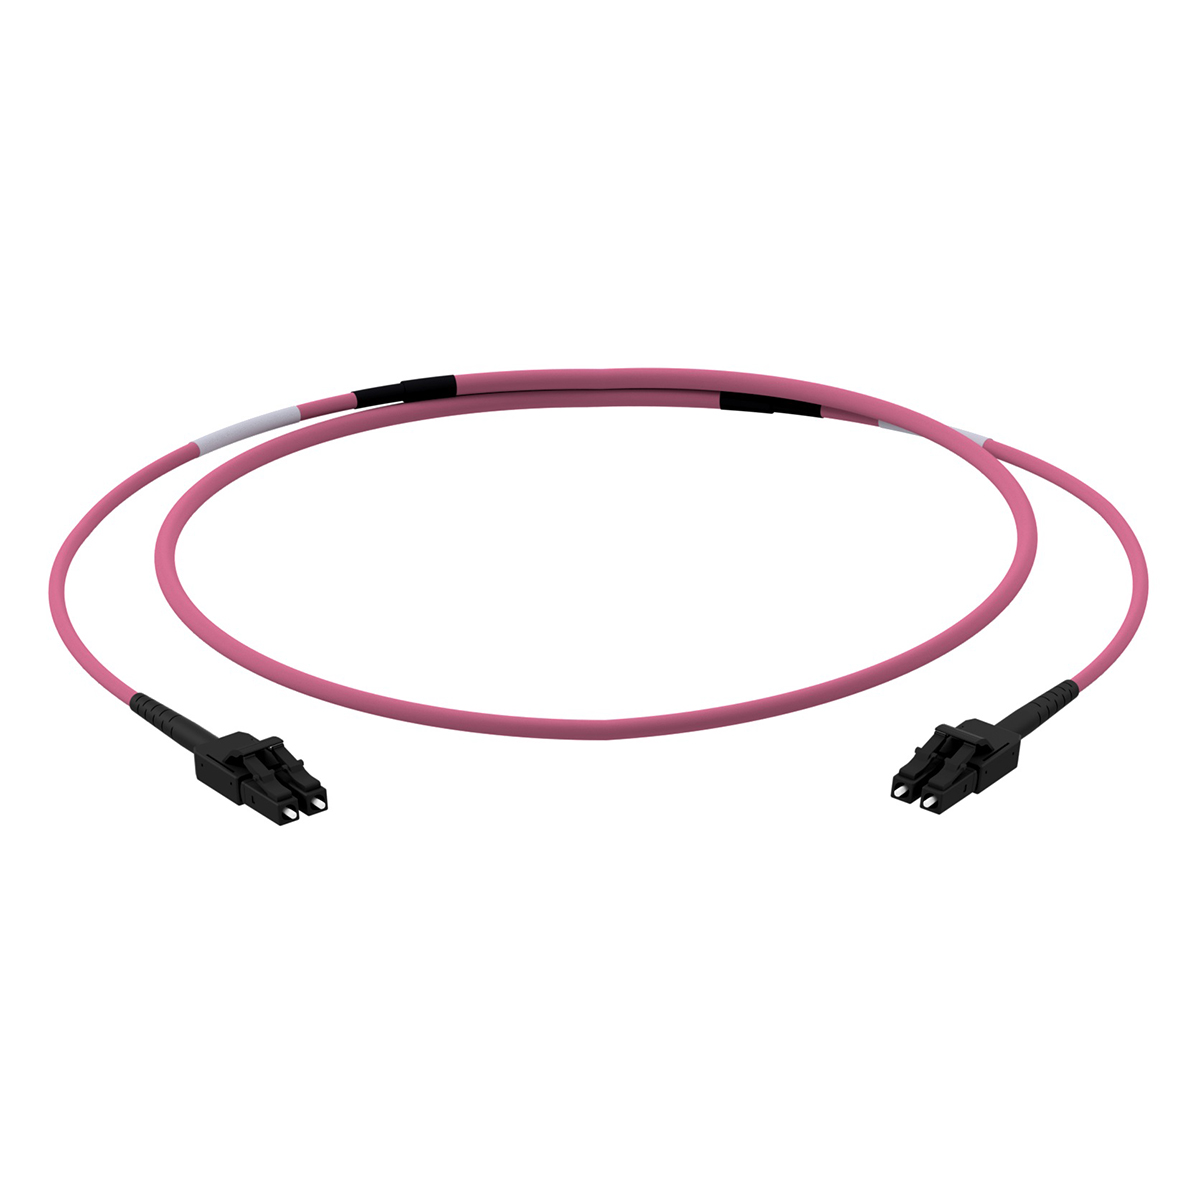 LWL-Patchkabel Duplex Multimode OM4, LC-PC/LC-PC, I-V(ZN)H(ZN)H rund 4,0 mm, mit LC Compact